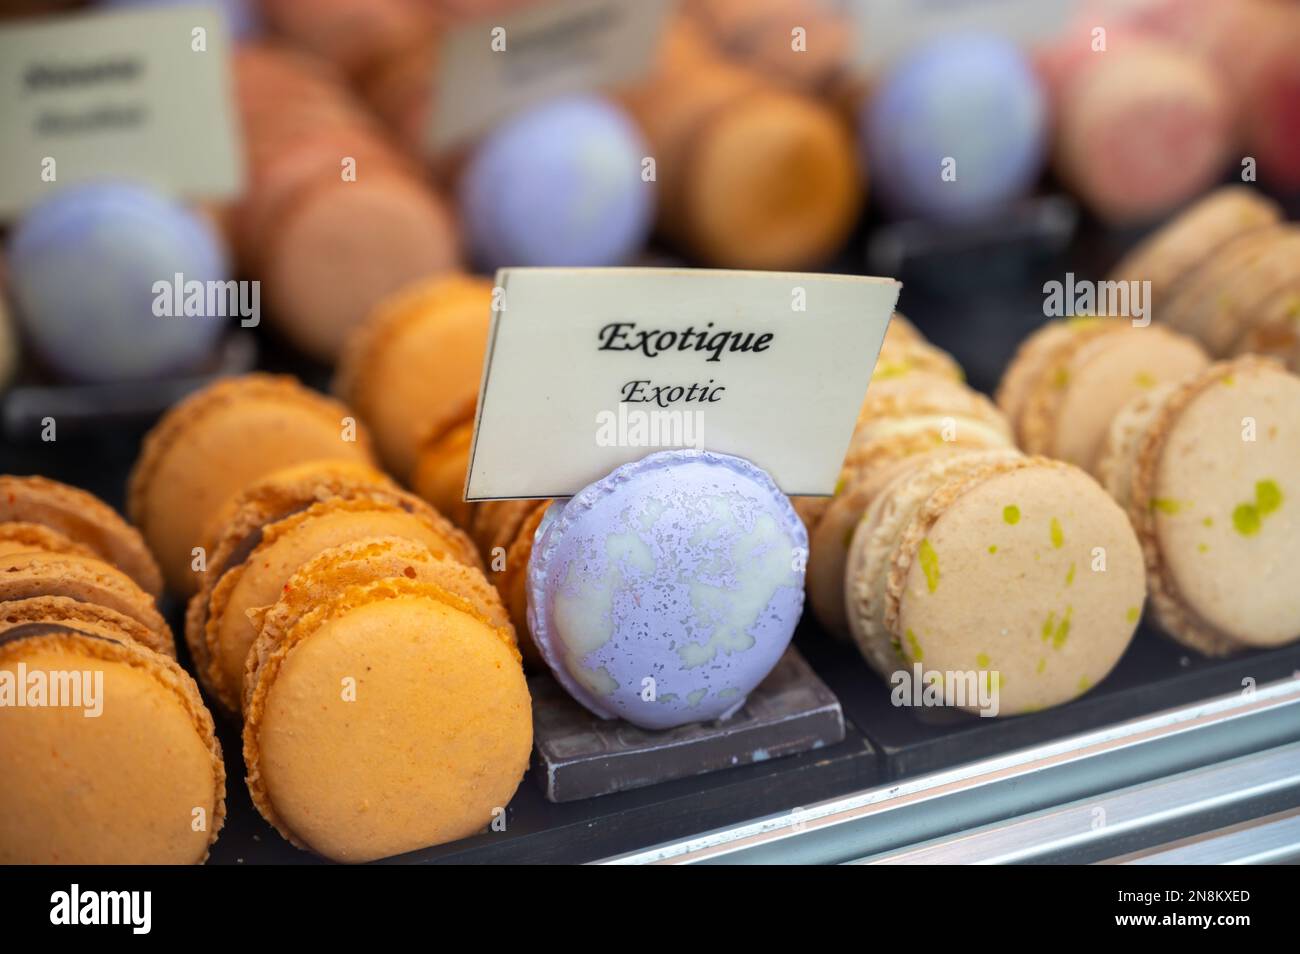 Macarons or French macaroon  sweet meringue-based confection made with egg white, icing sugar, granulated sugar, almond meal, and food colouring, swee Stock Photo